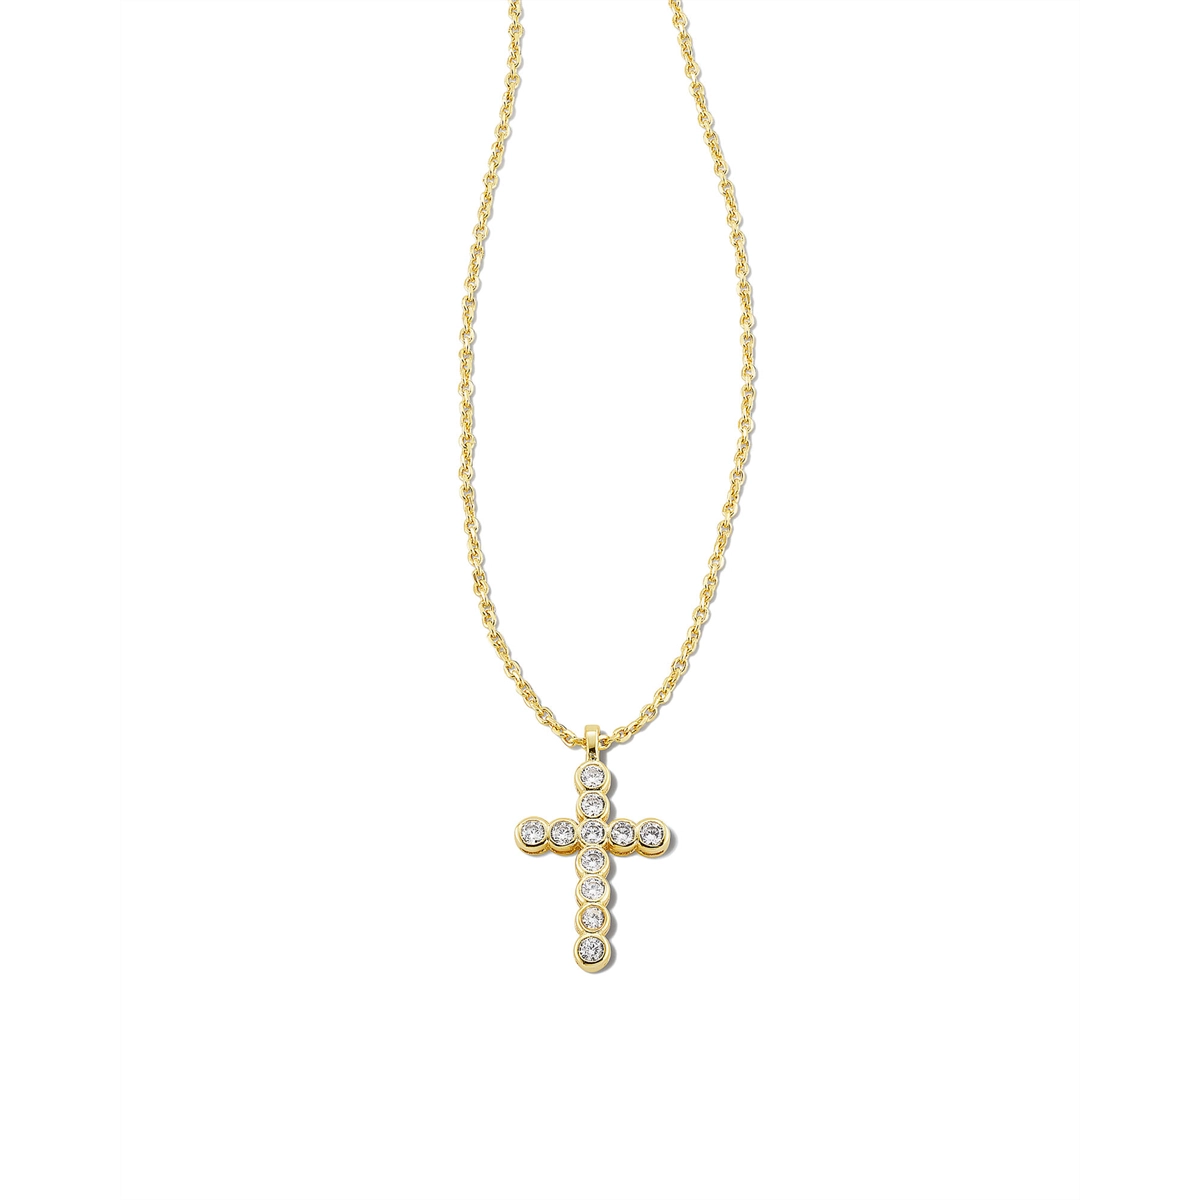 Kendra Scott Cross Crystal Pendant Necklace in Gold with White Crystal ...